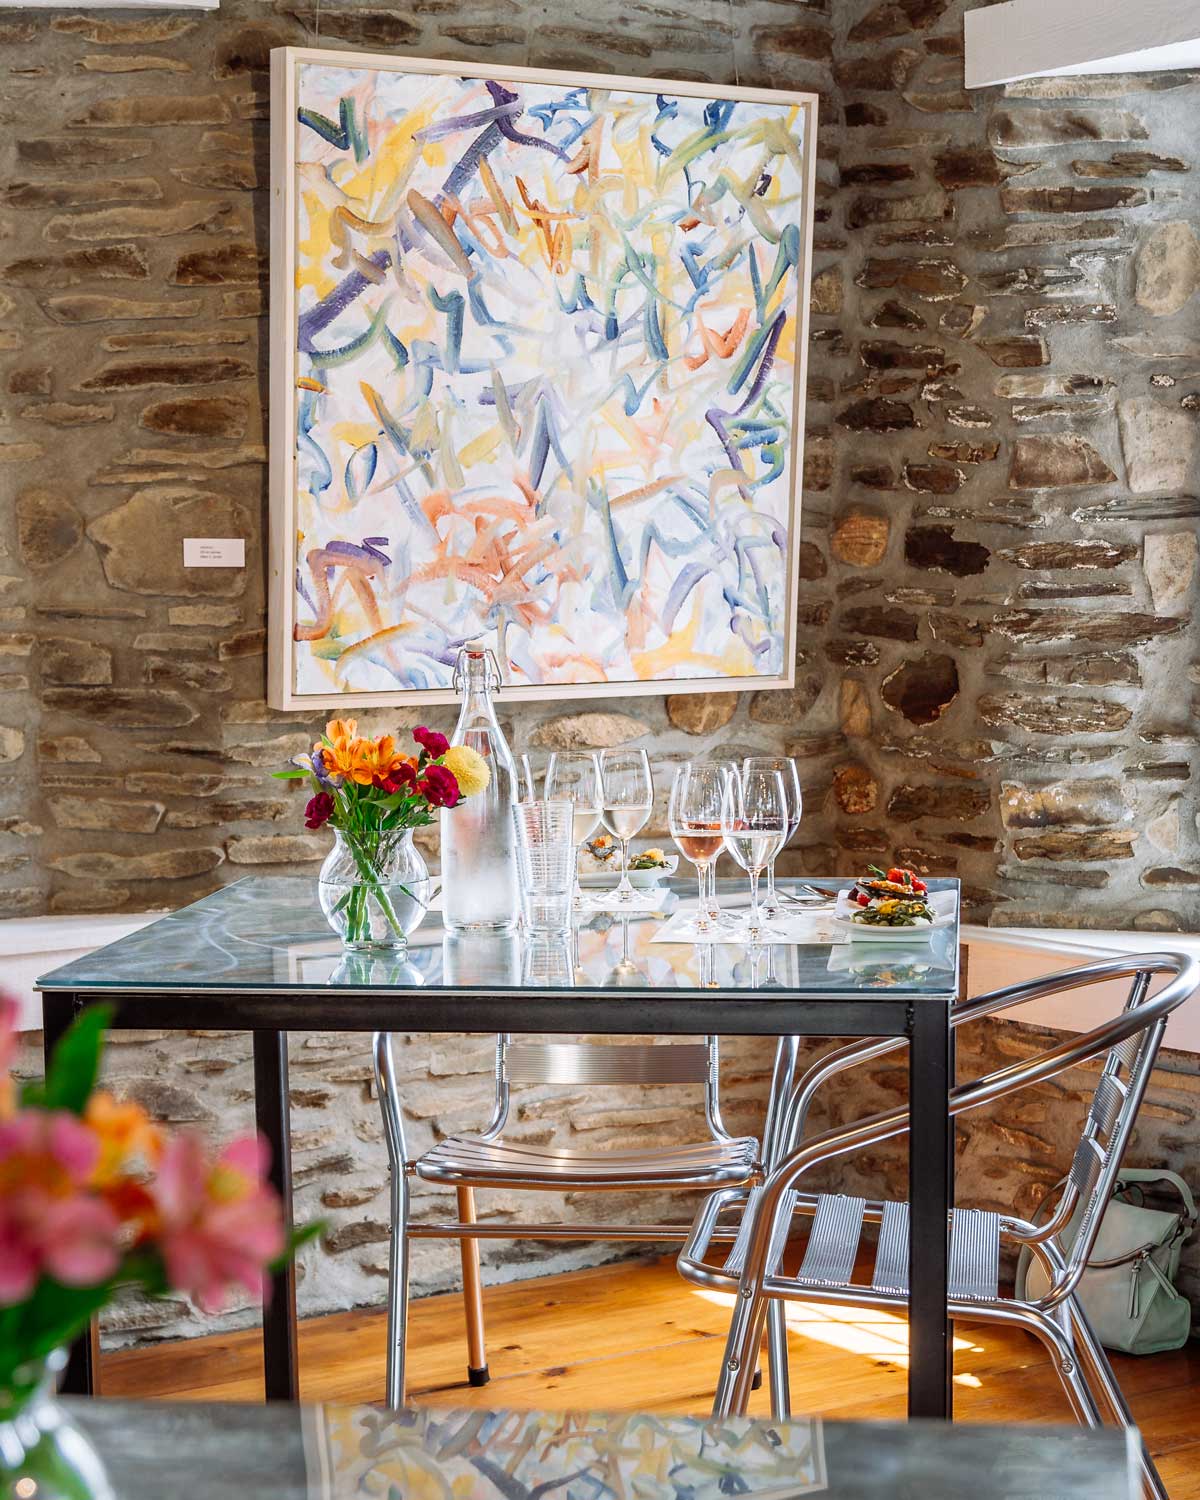 Dinning Table set with wine glasses, food, and flowers with a painting in the background.